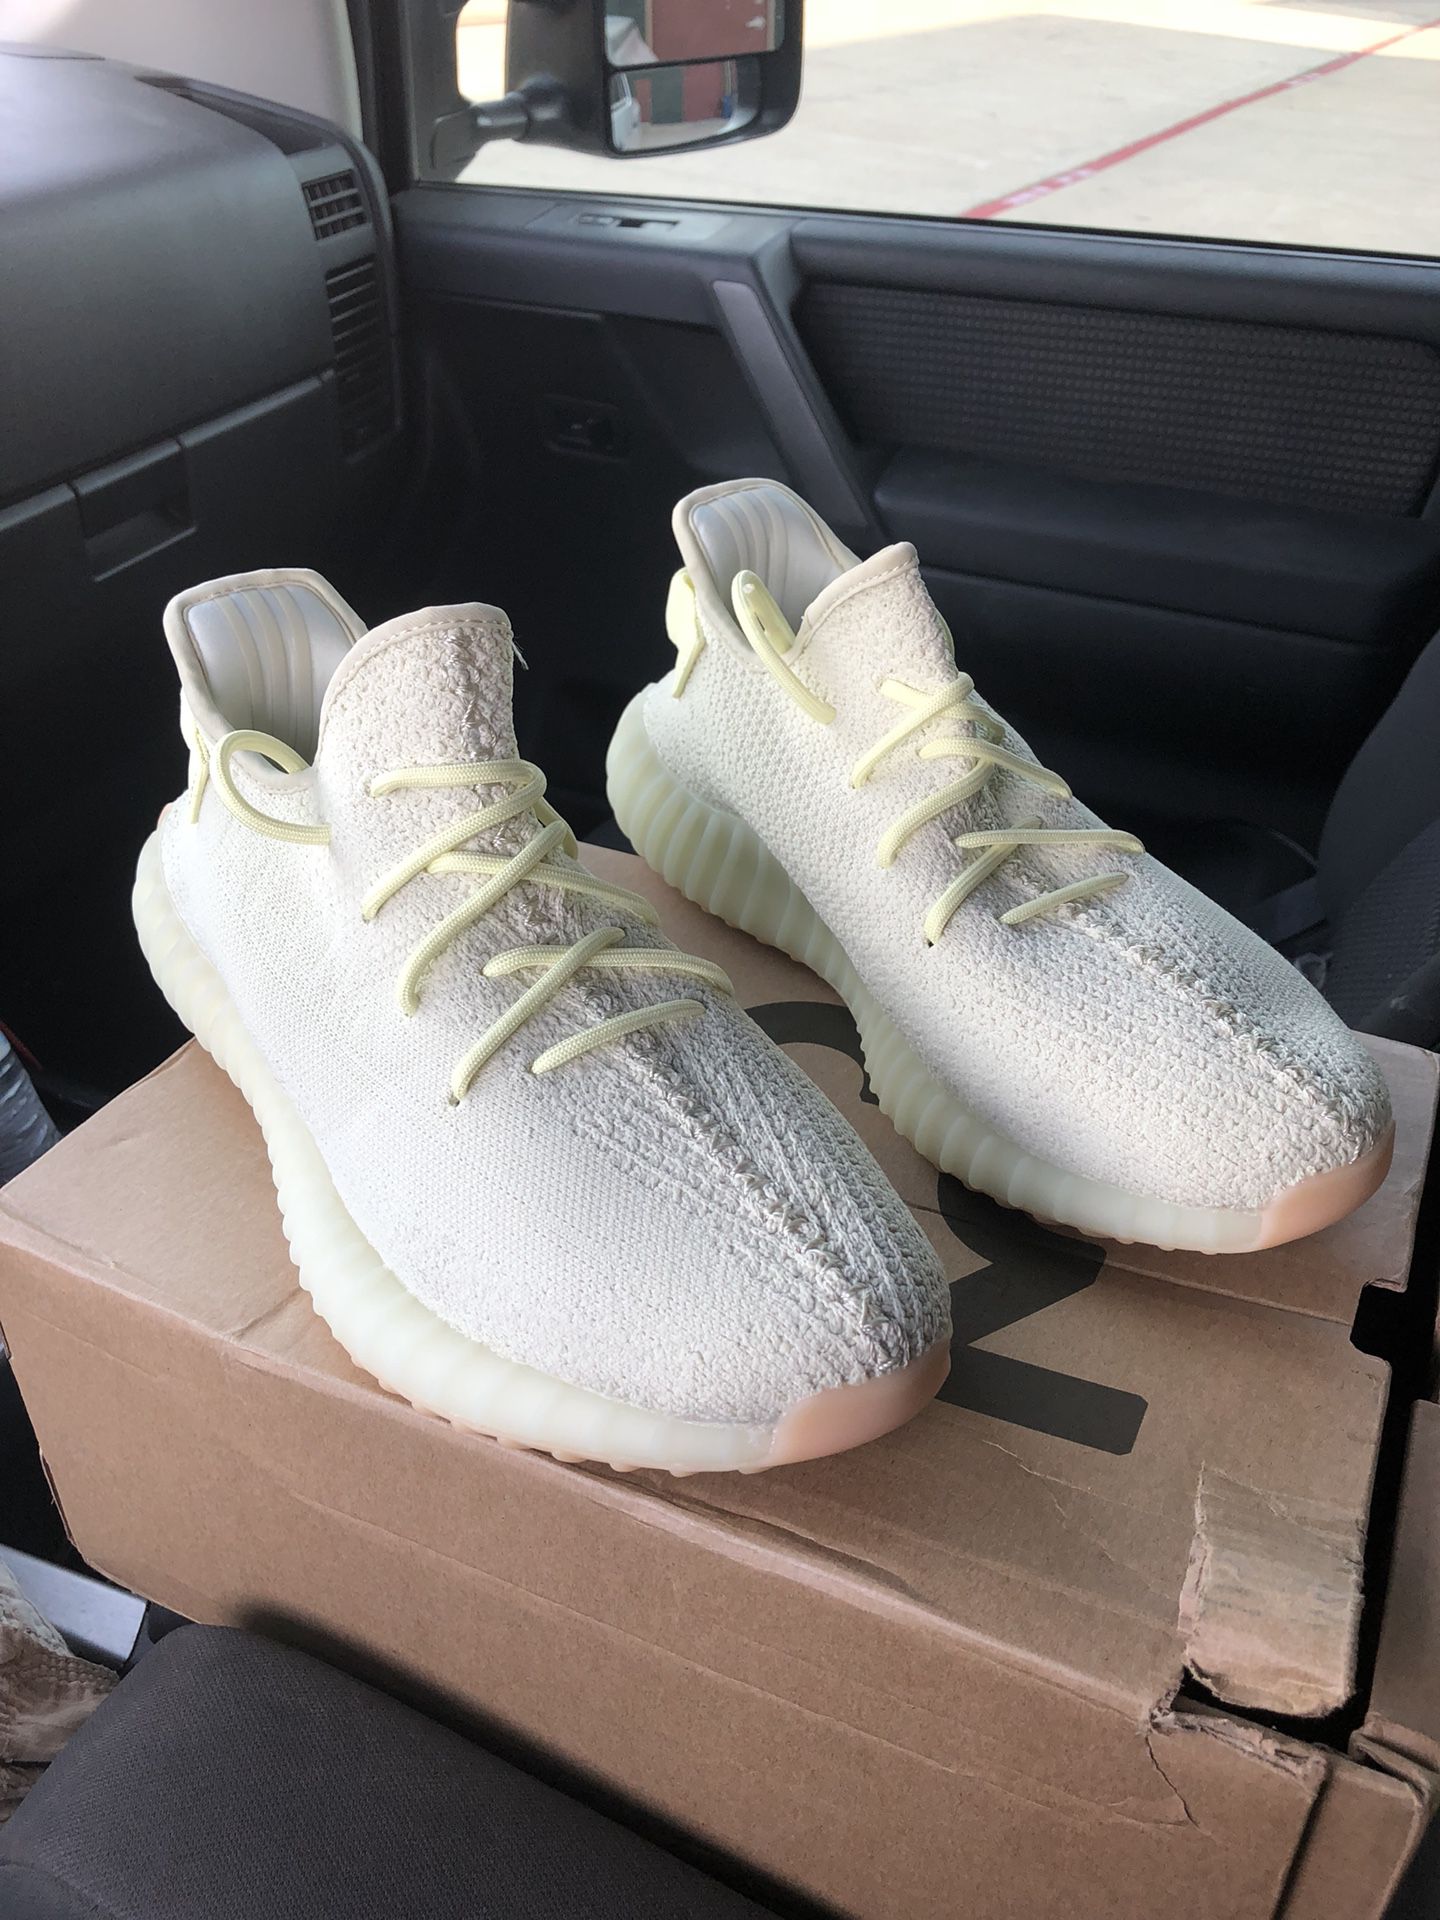 Yeezy 350 butters for Sale in Frisco, TX - OfferUp